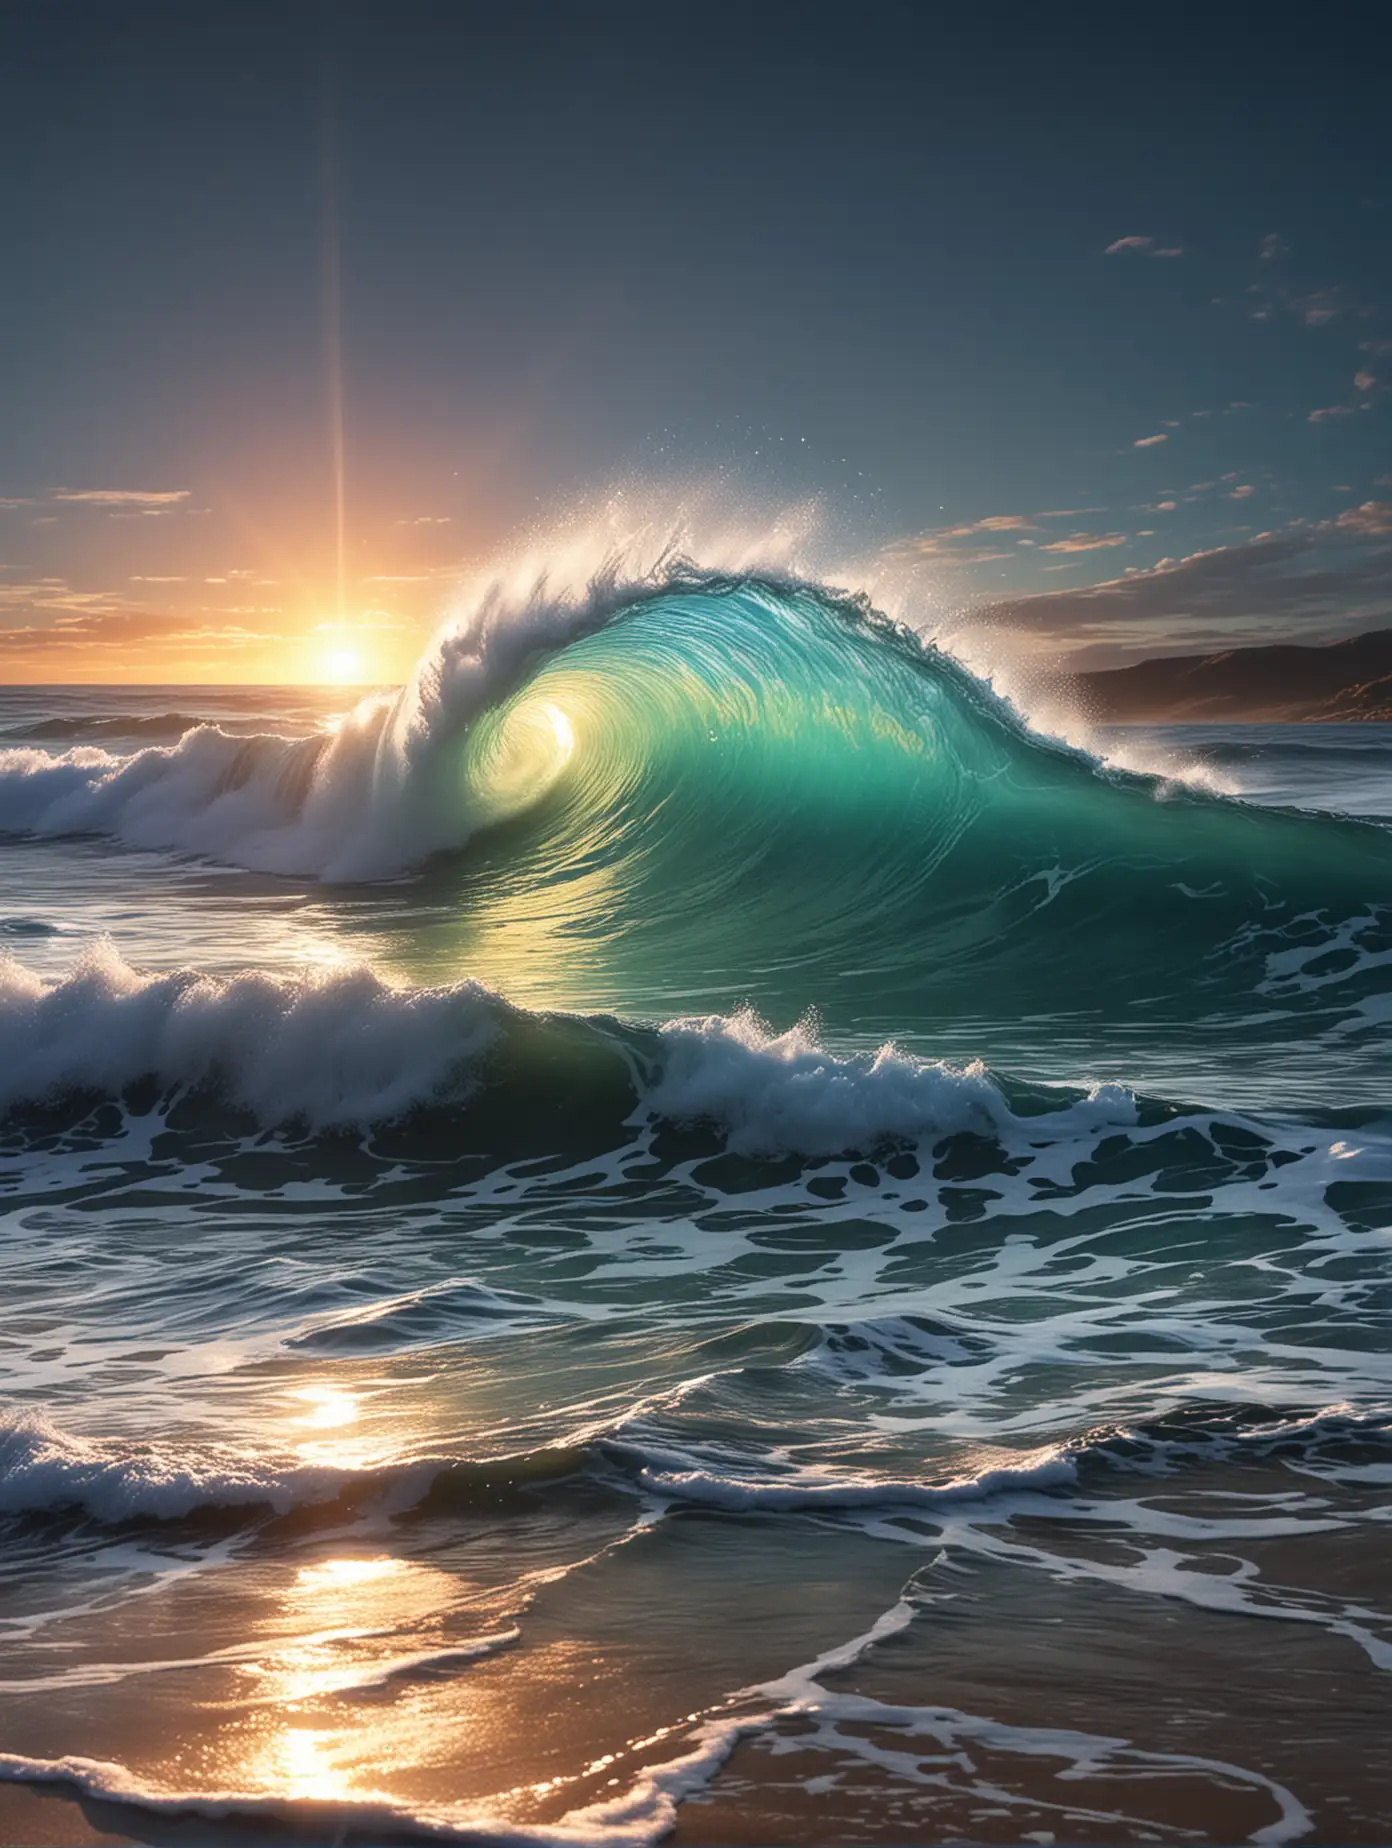 Can you make a holographic art containing bright waves emulating vivid vision and bright future, all composed as intrinsic hologprahic pattern of multiple ocean waves symbolistic of digital waves nice holographic perspectives